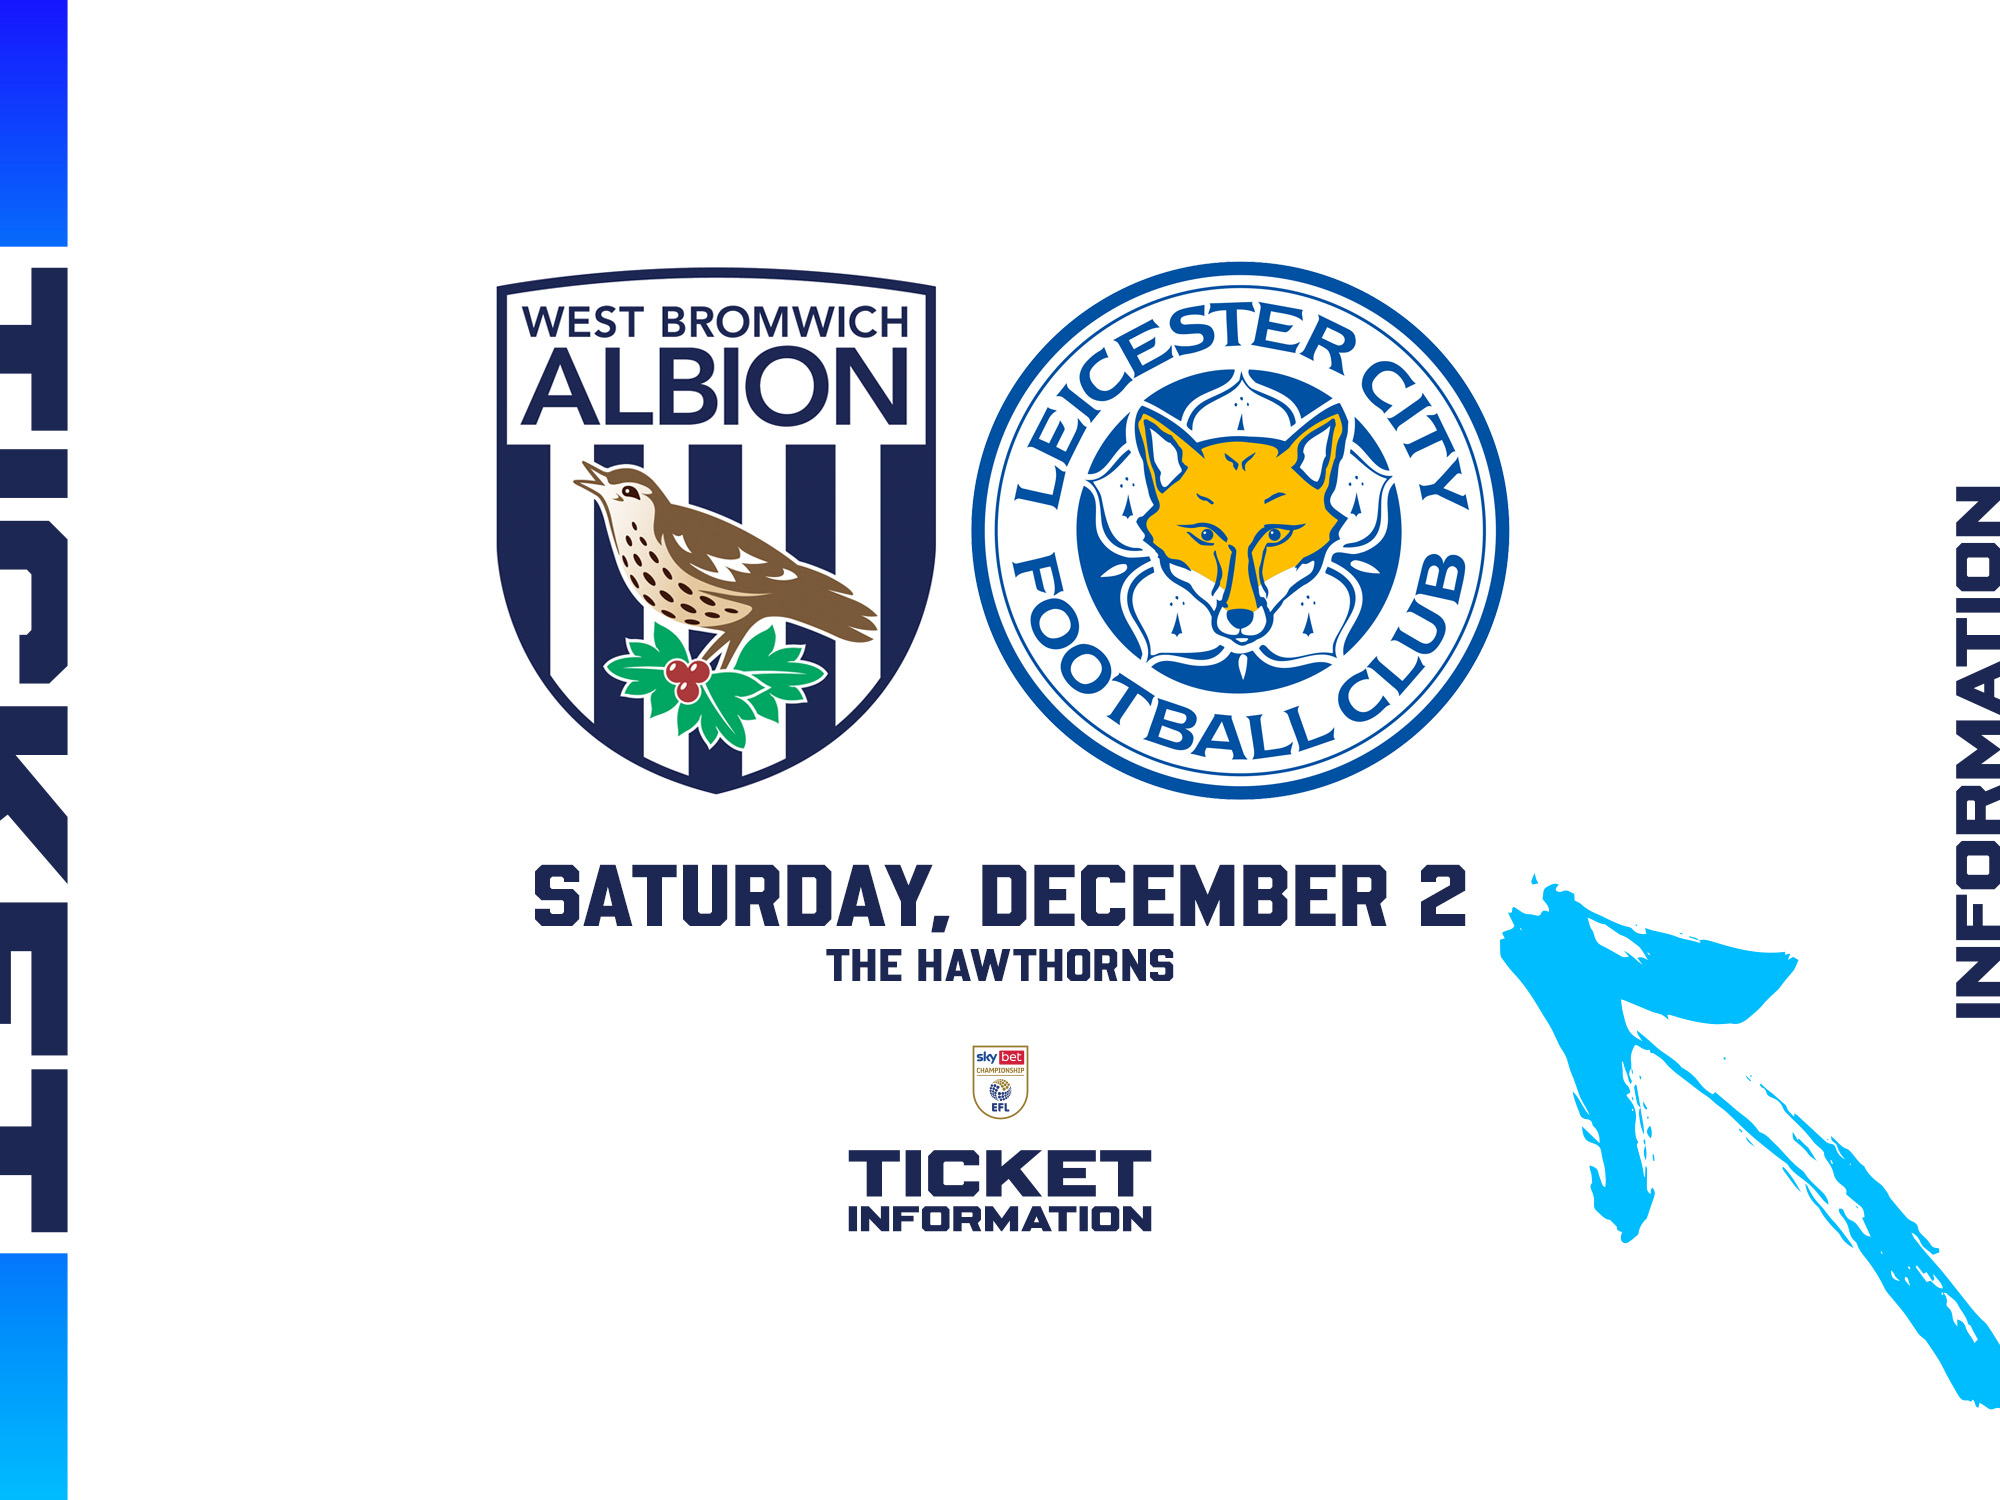 WBA and Leicester City badges on the ticket graphic 